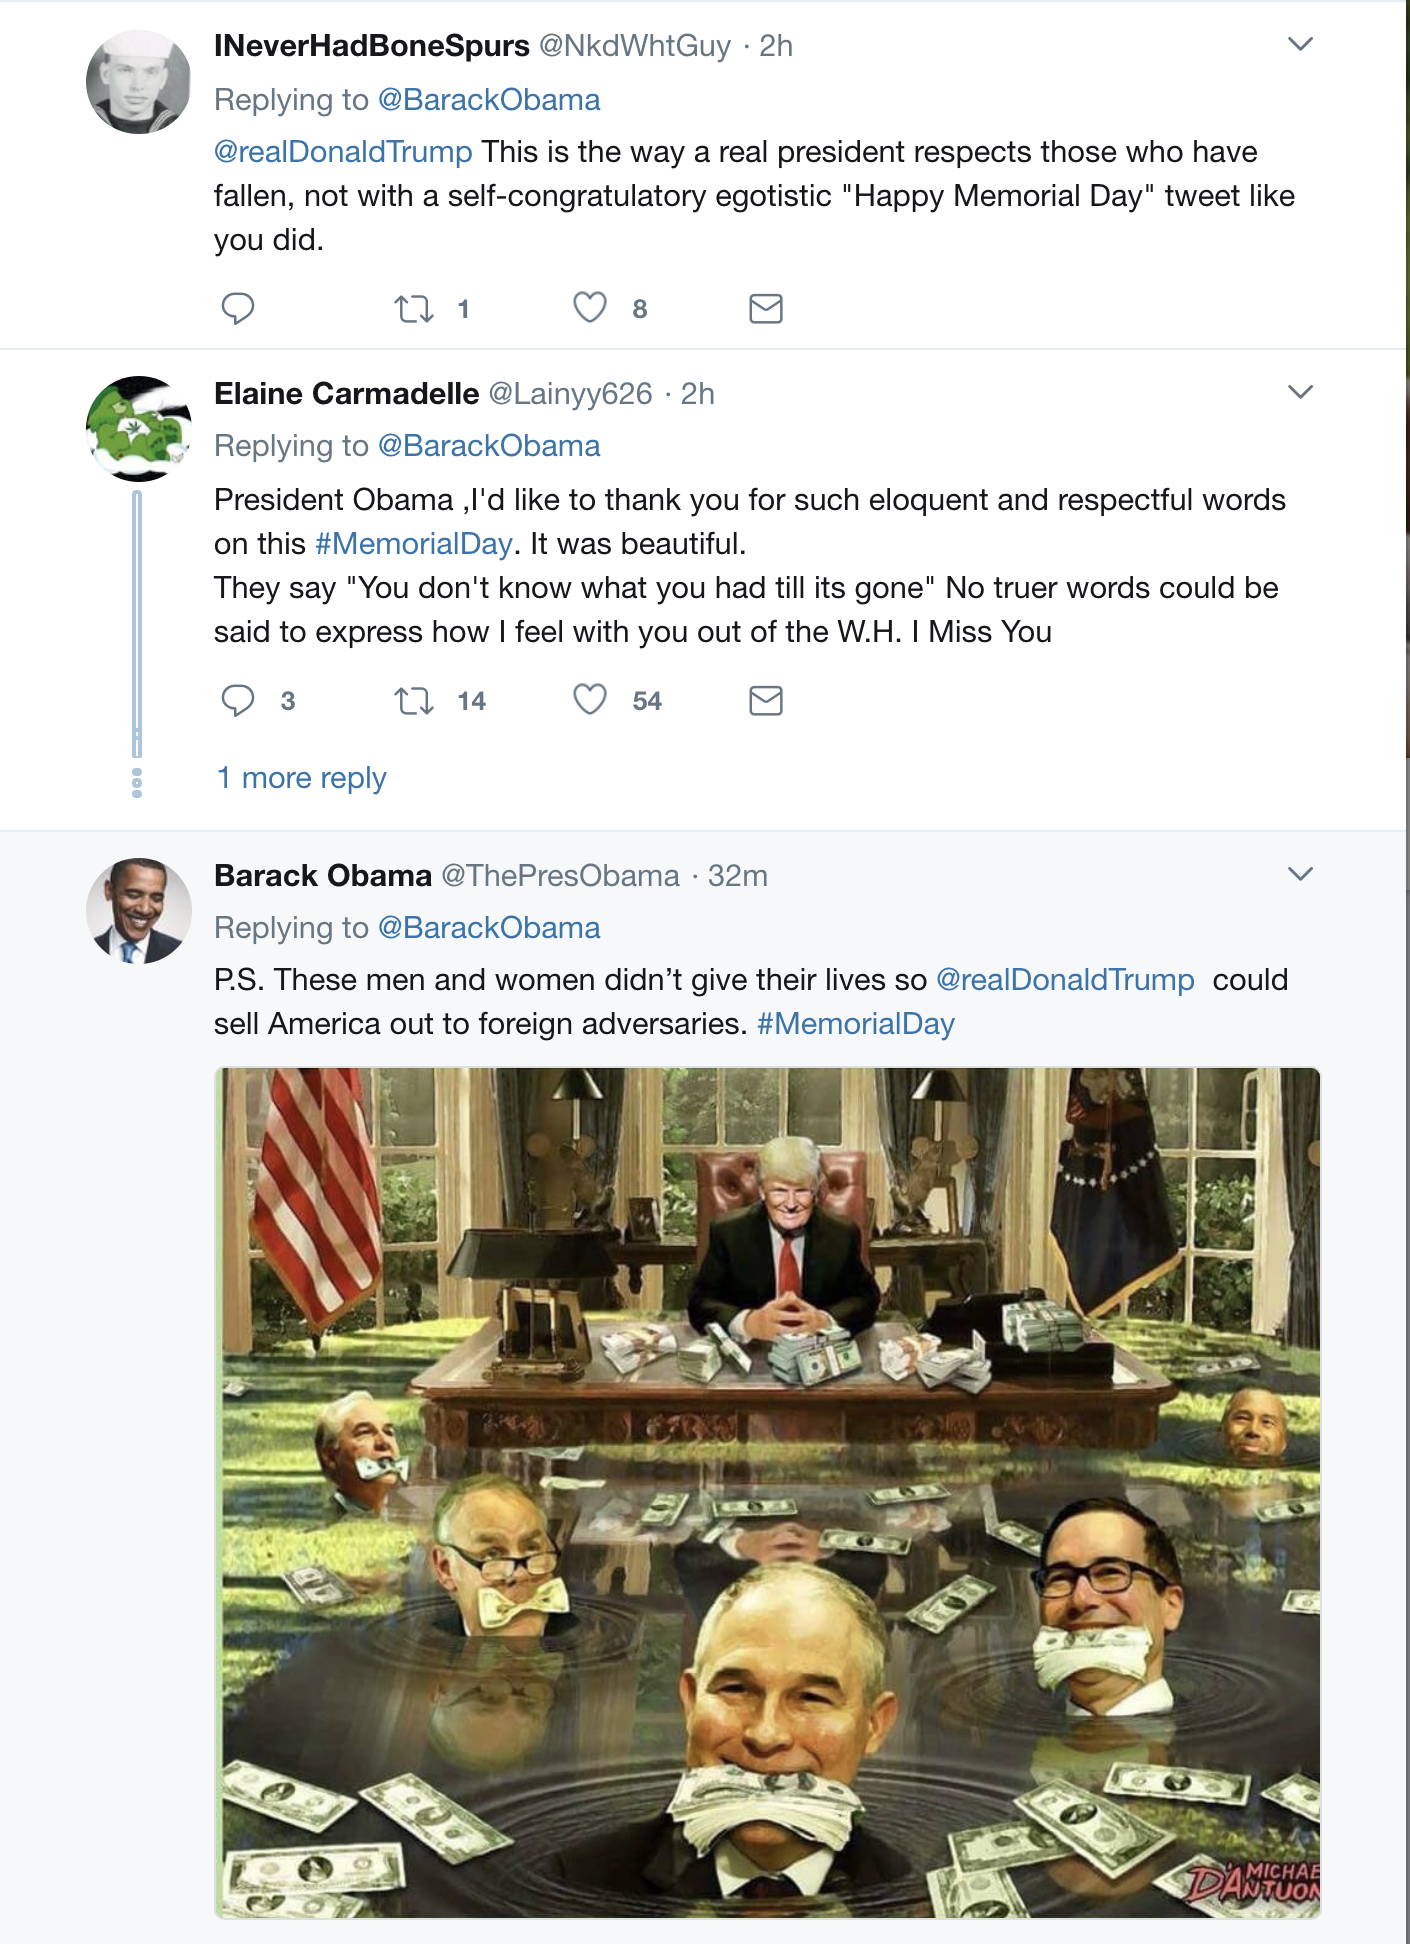 Screen-Shot-2018-05-28-at-2.10.38-PM Obama Goes Full Presidential On Twitter - Trump Has Brutal Memorial Day Meltdown Corruption Crime Donald Trump Politics Top Stories 